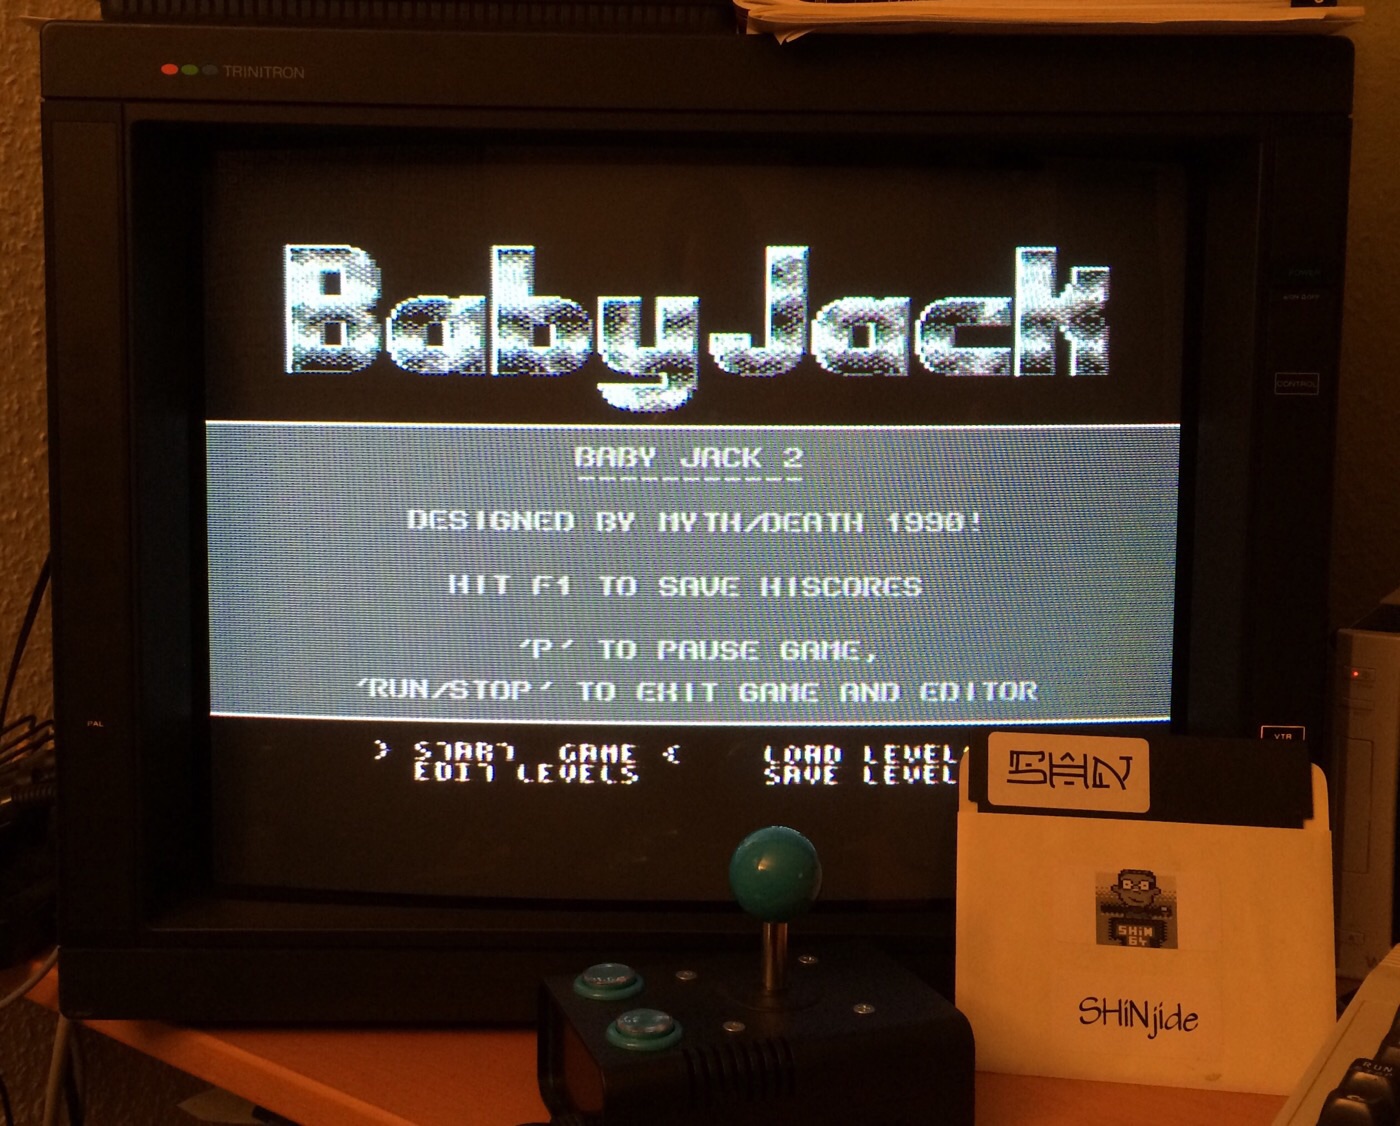 SHiNjide: Baby Jack 2 (Commodore 64) 15,920 points on 2015-01-04 15:23:02